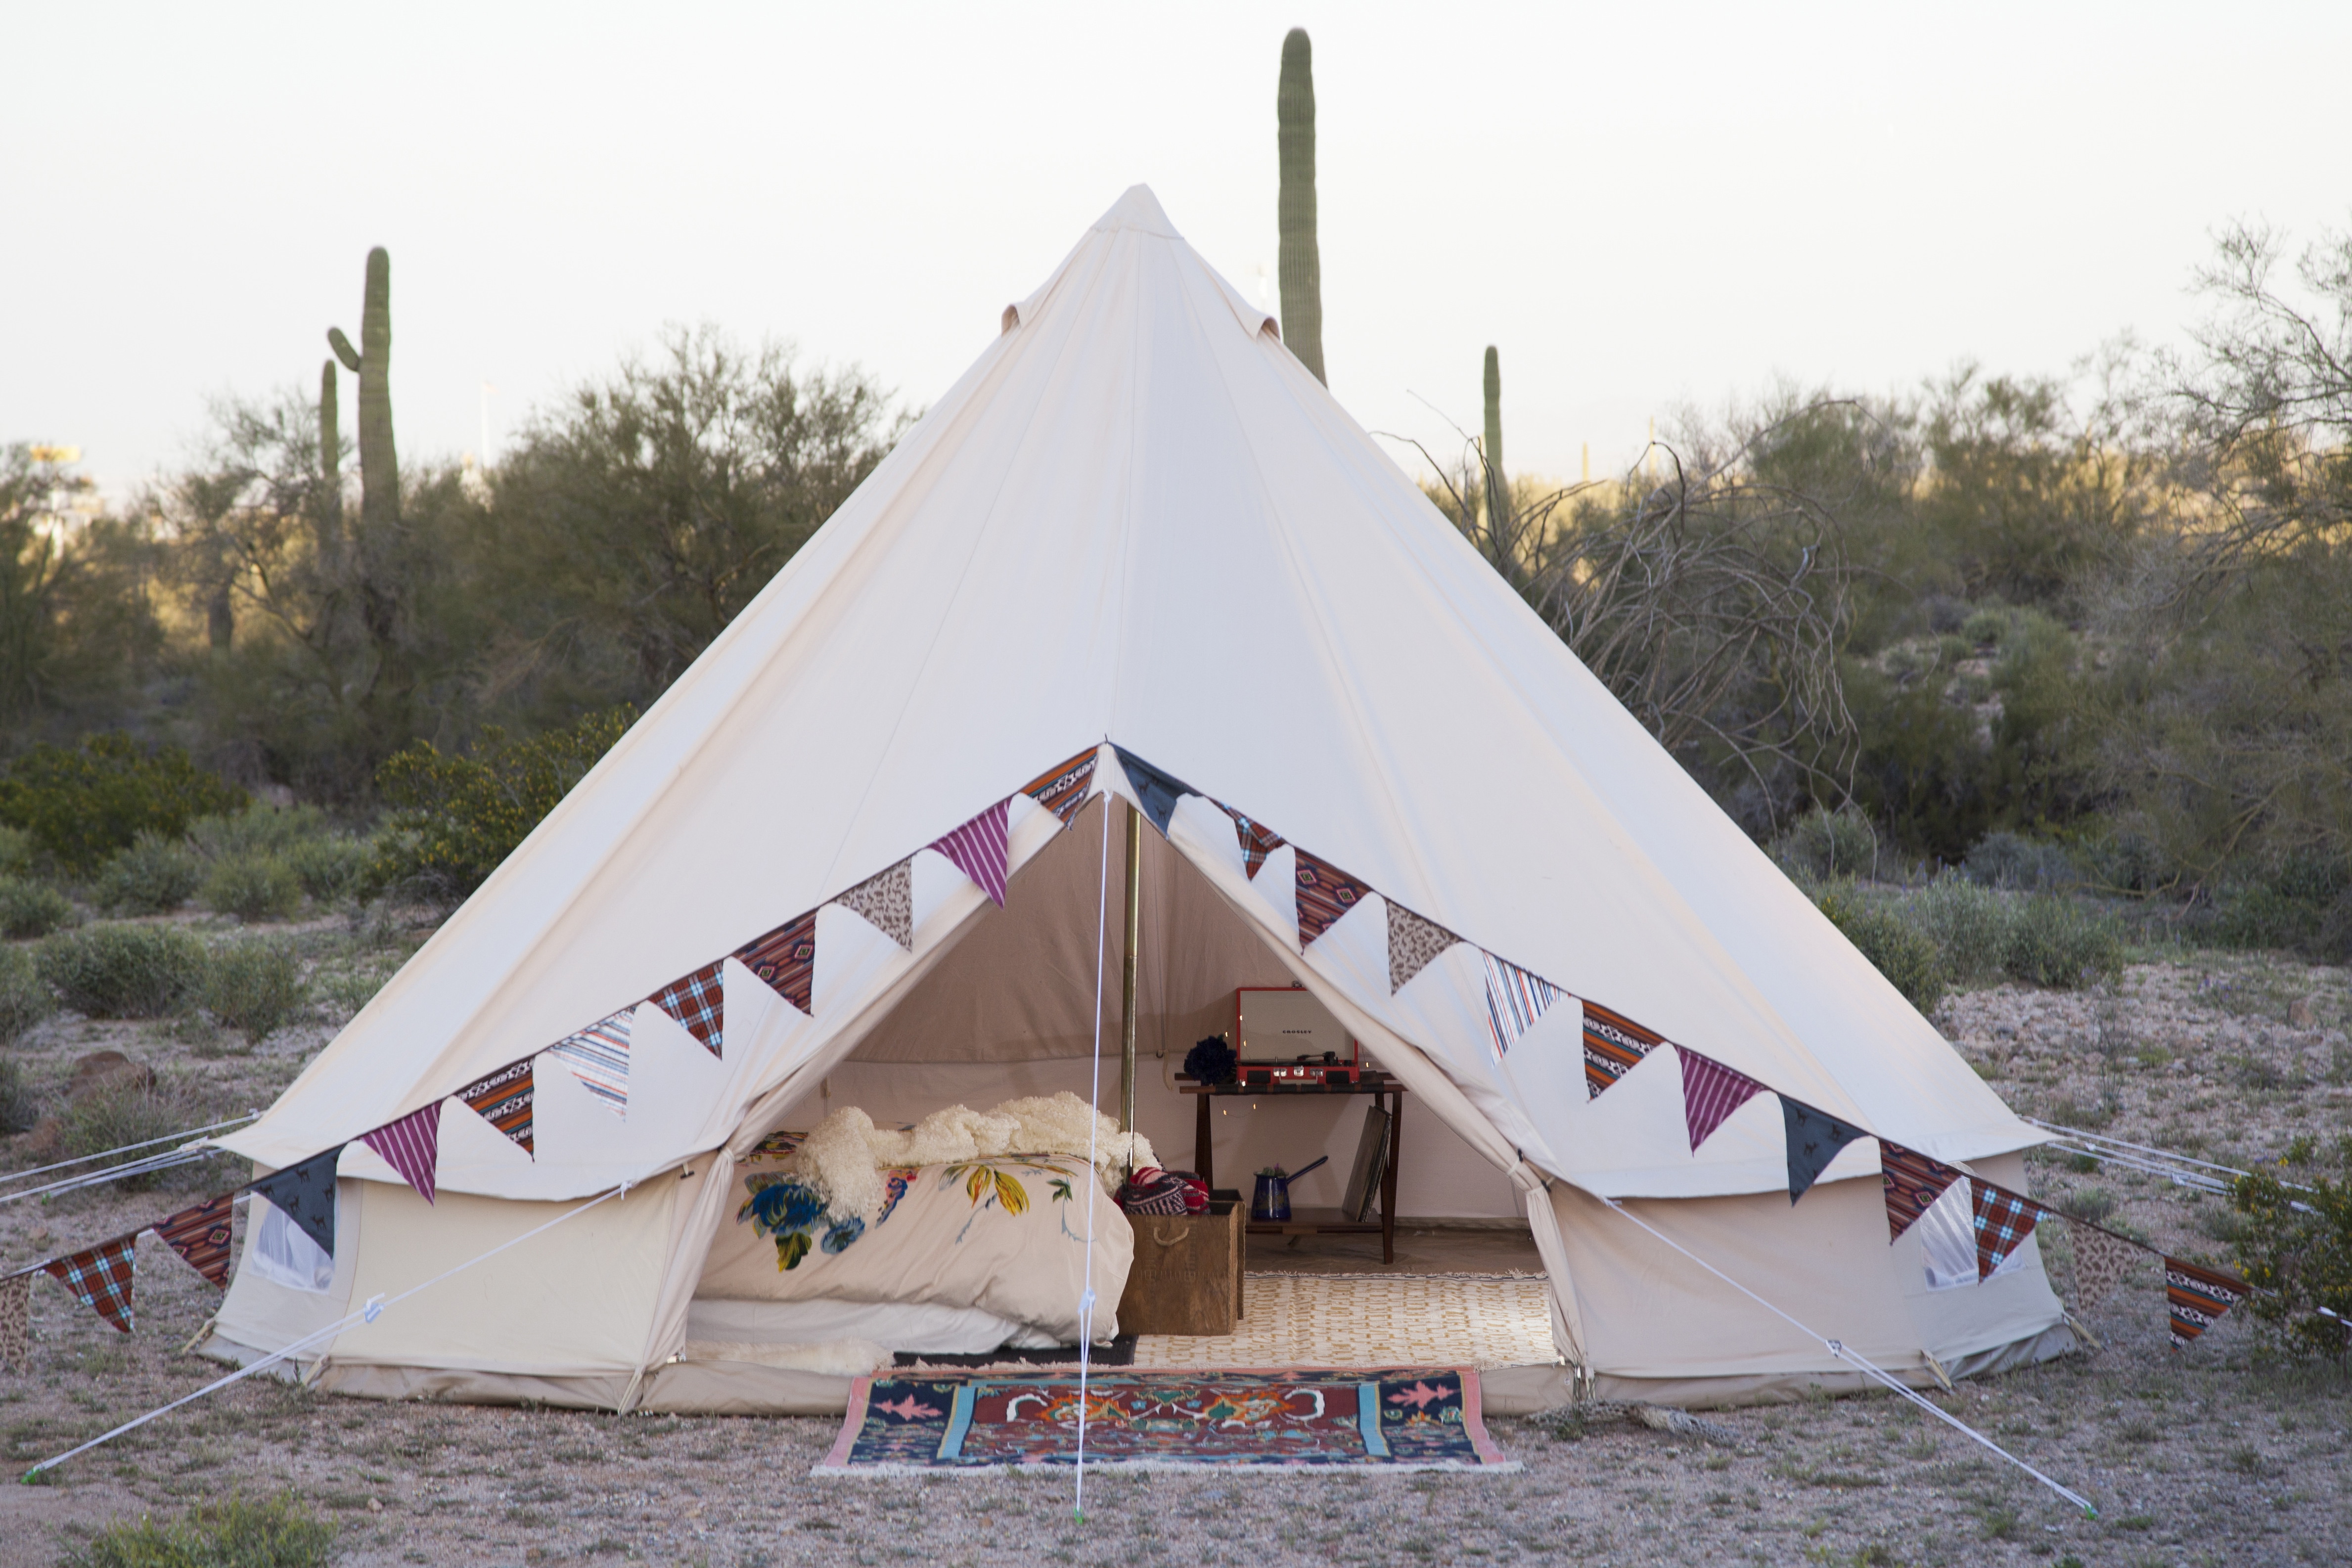 10 Great Glamping Tents & Accessories